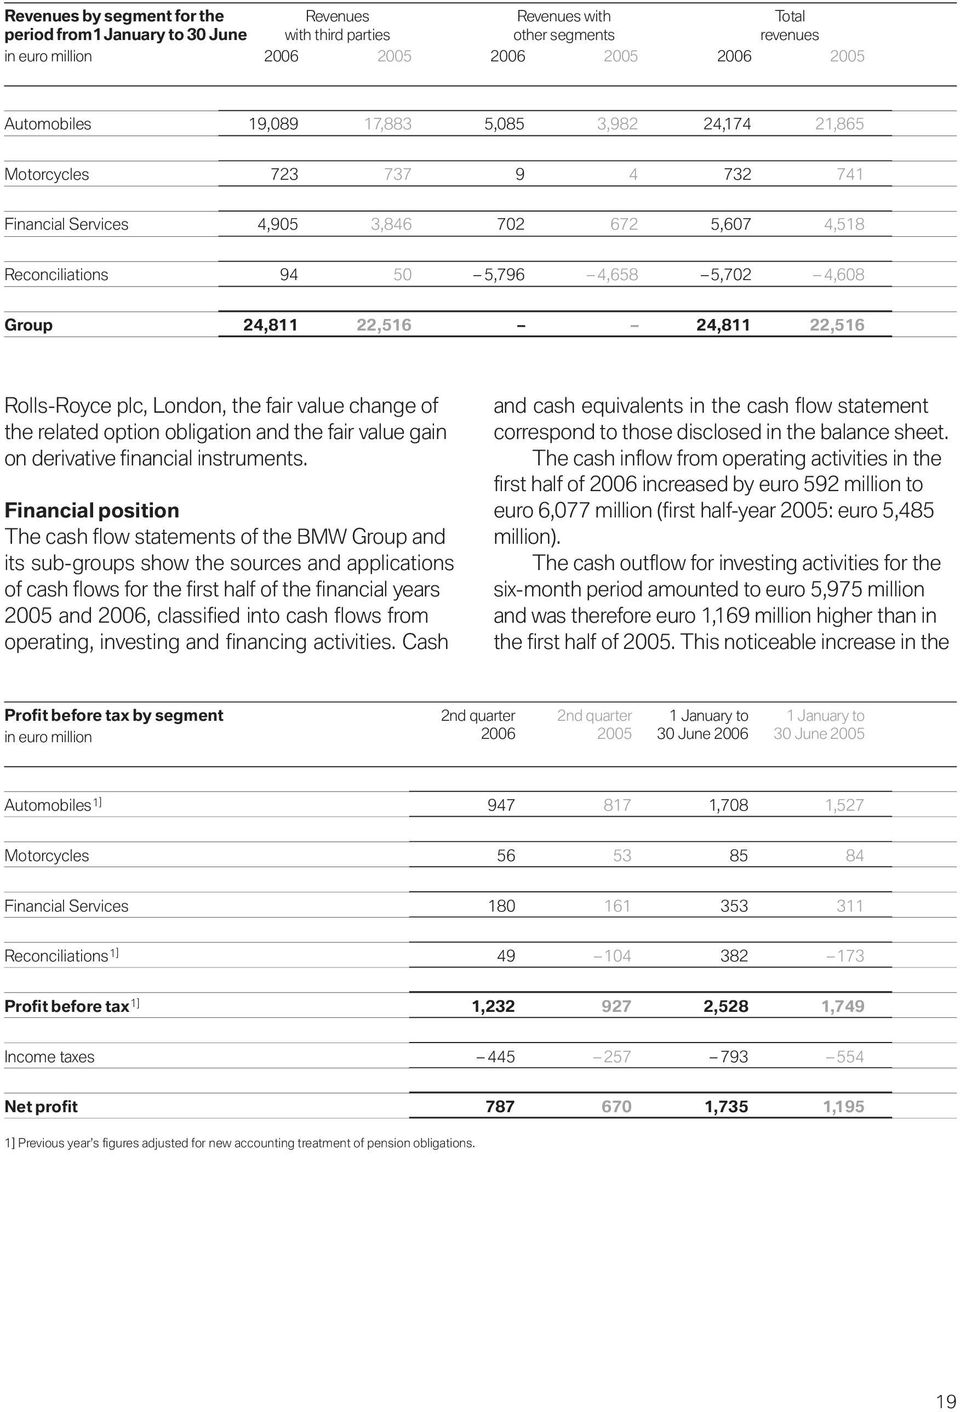 Rolls-Royce plc, London, the fair value change of the related option obligation and the fair value gain on derivative financial instruments.